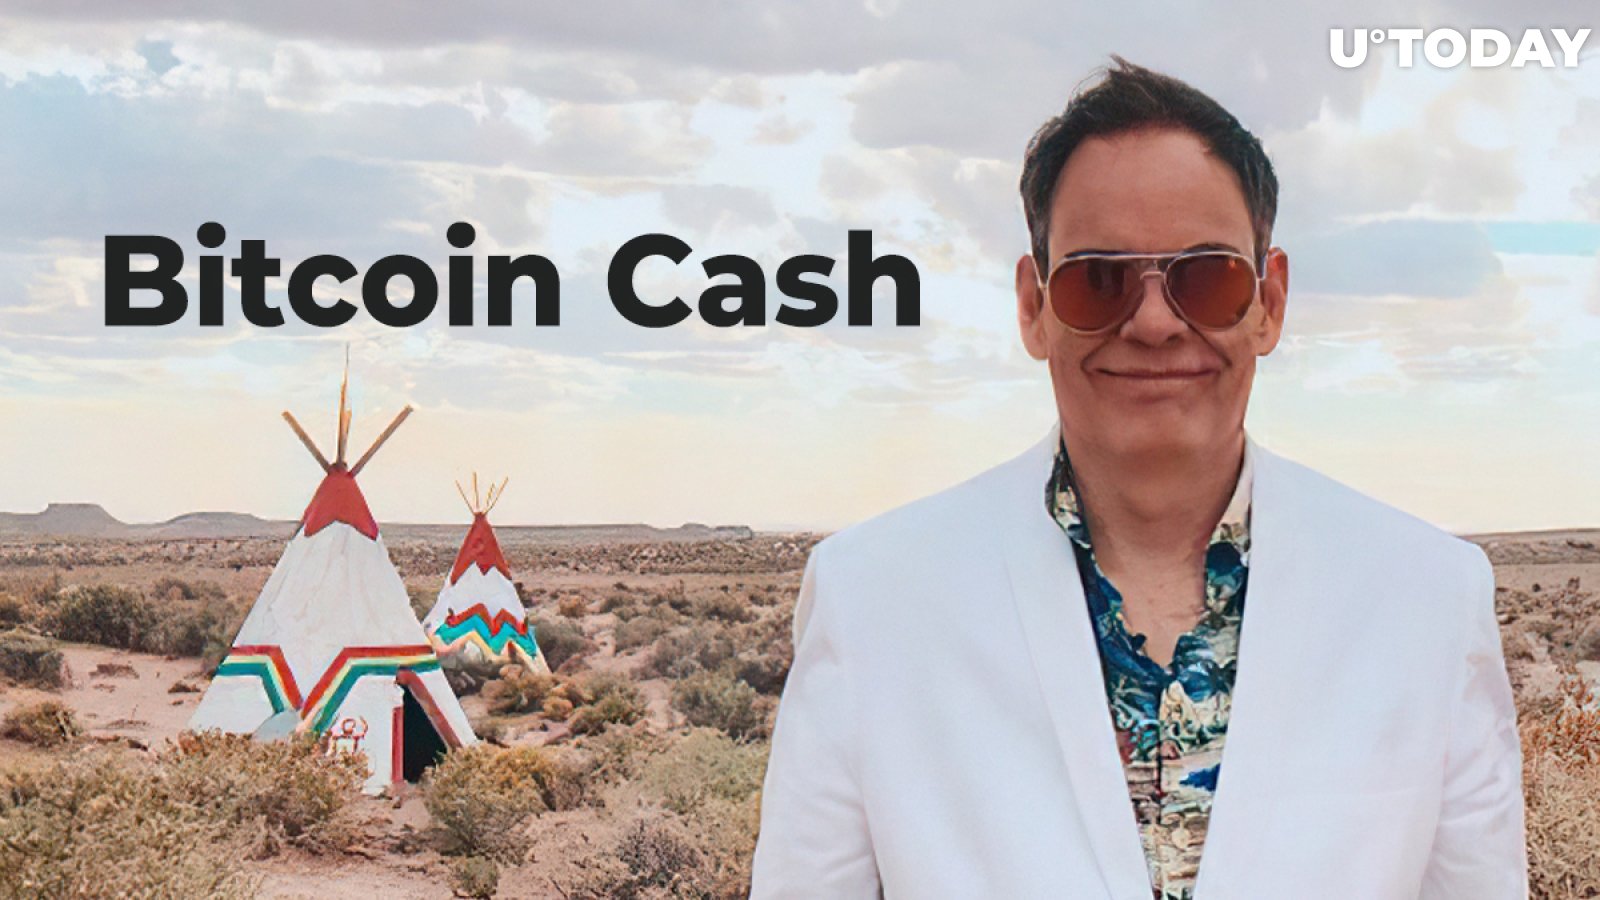 Max Keiser Slams Bitcoin Cash (BCH), Says It Is Going to "Euthanize Itself *Again*"